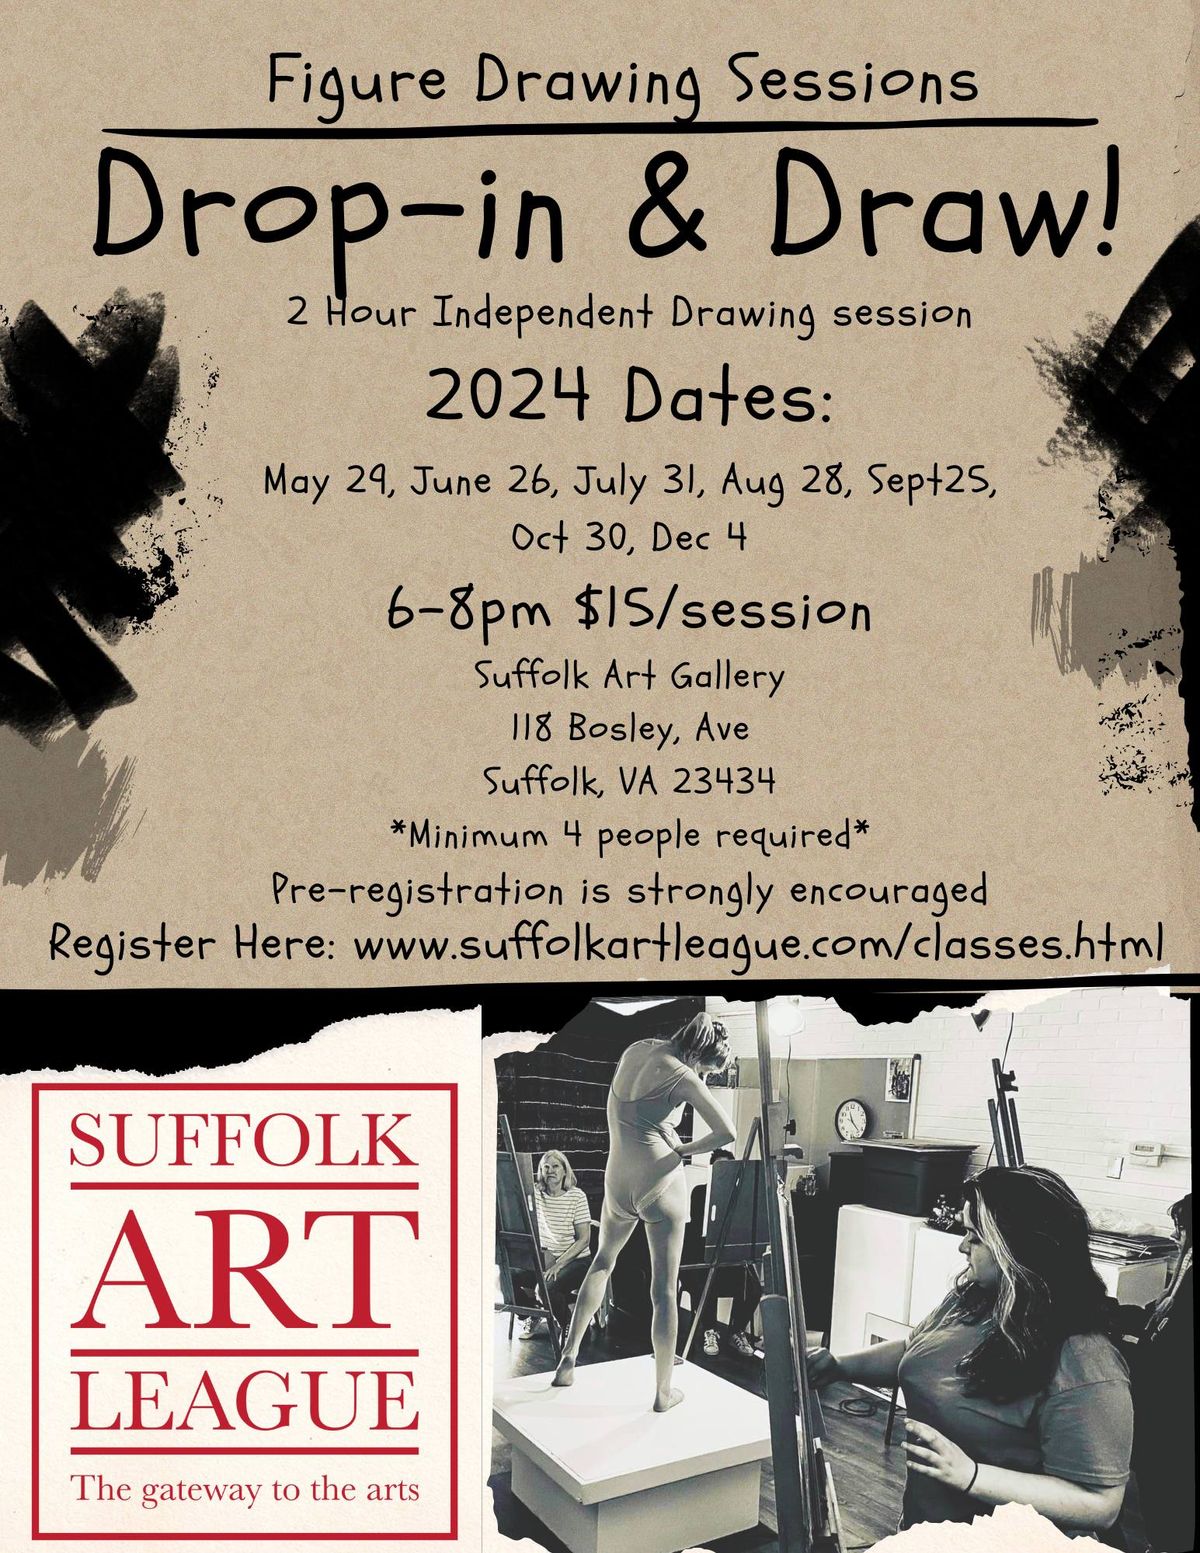 Drop in & Draw! Monthly Independent Drawing Sessions